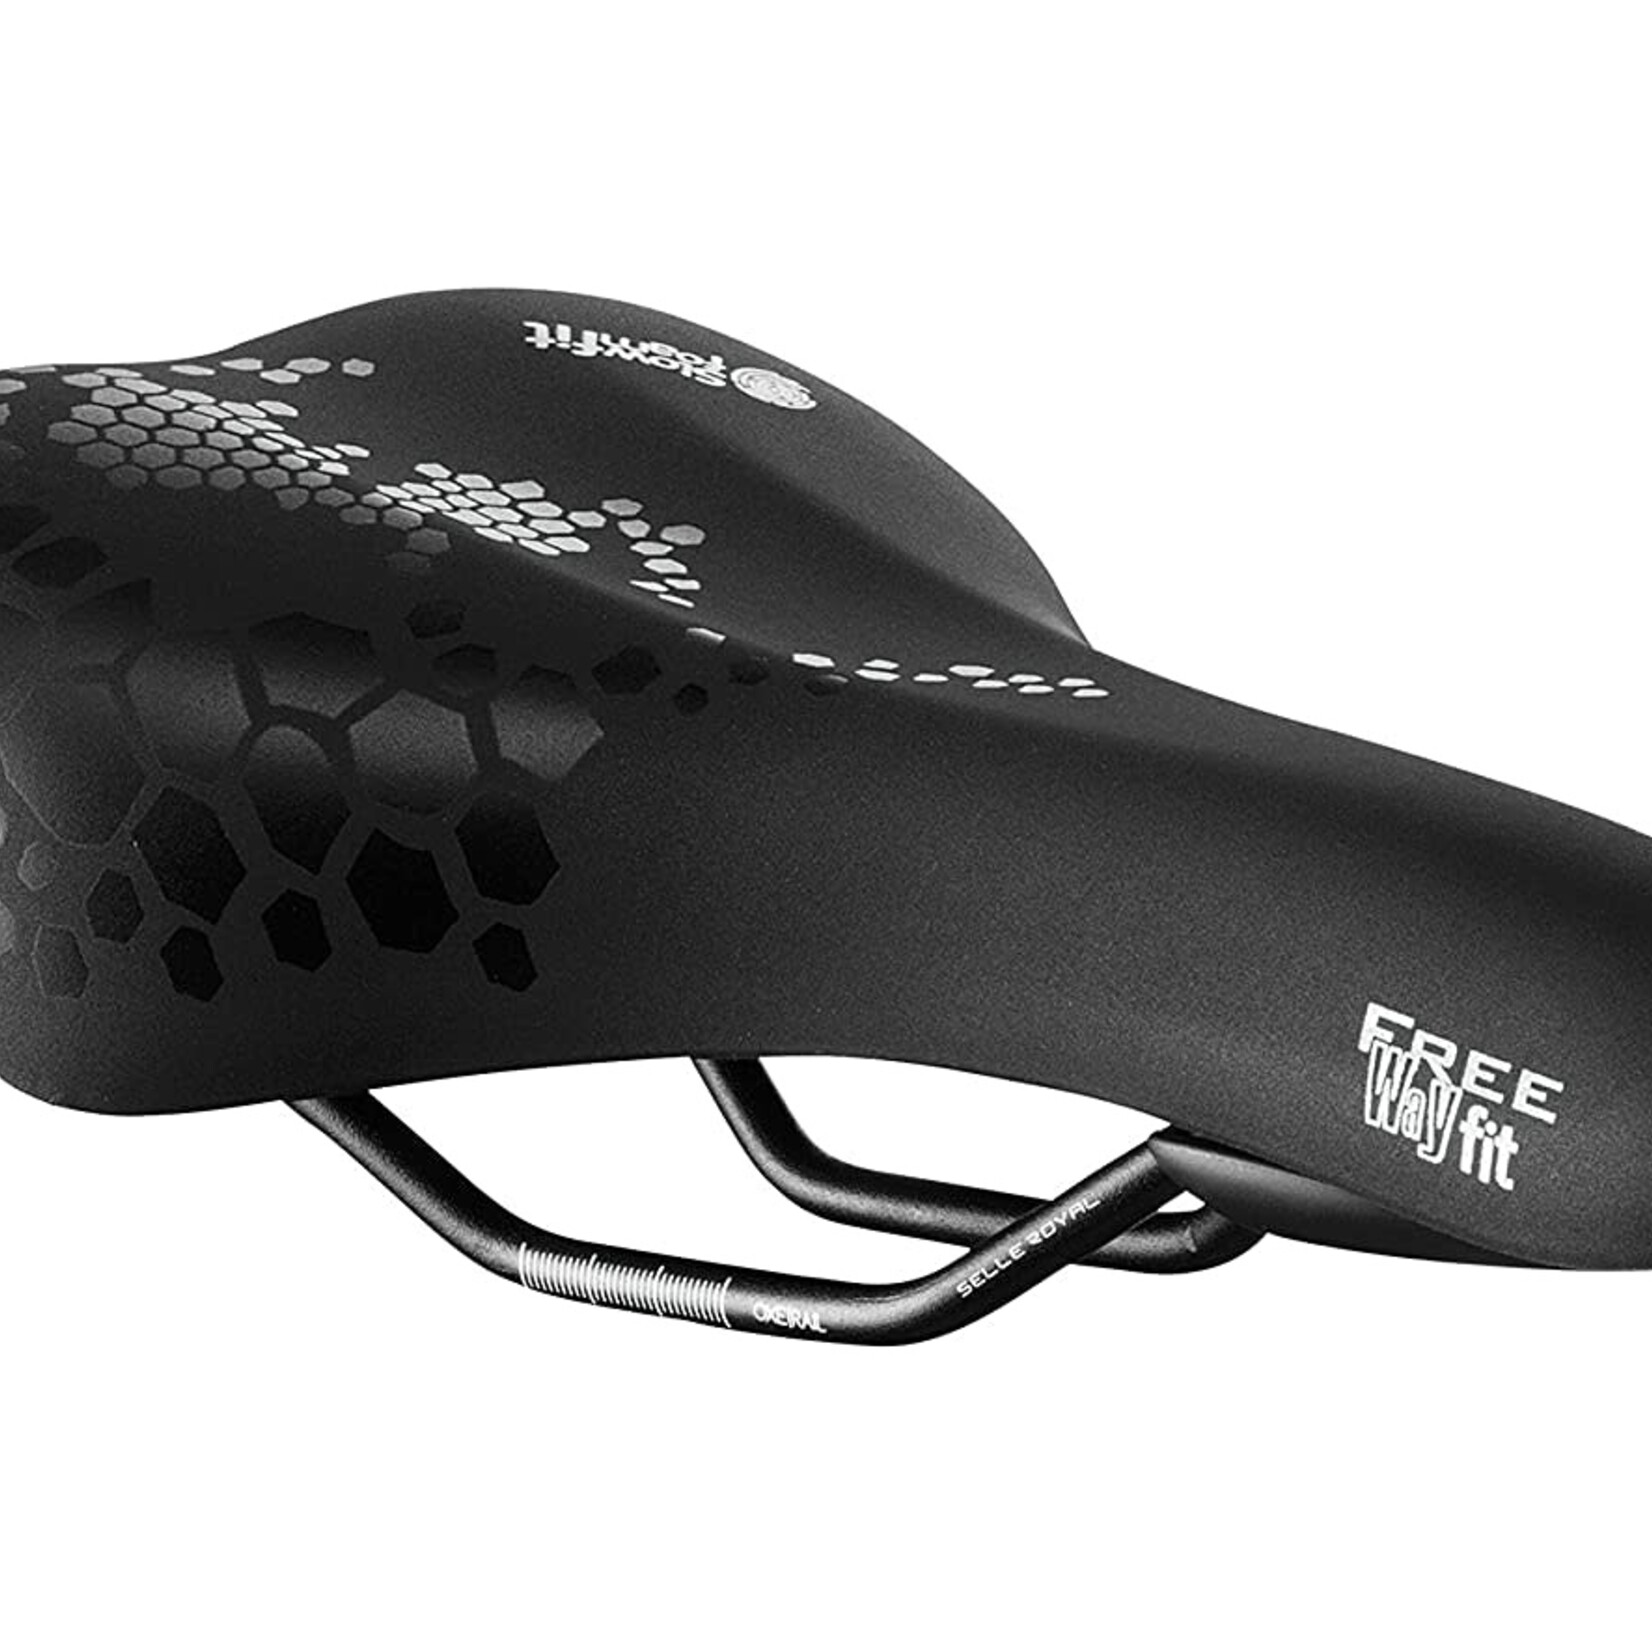 Selle Royal Selle Royal, Men's Freeway Fit Moderate, Saddle, Soft Touch, Black